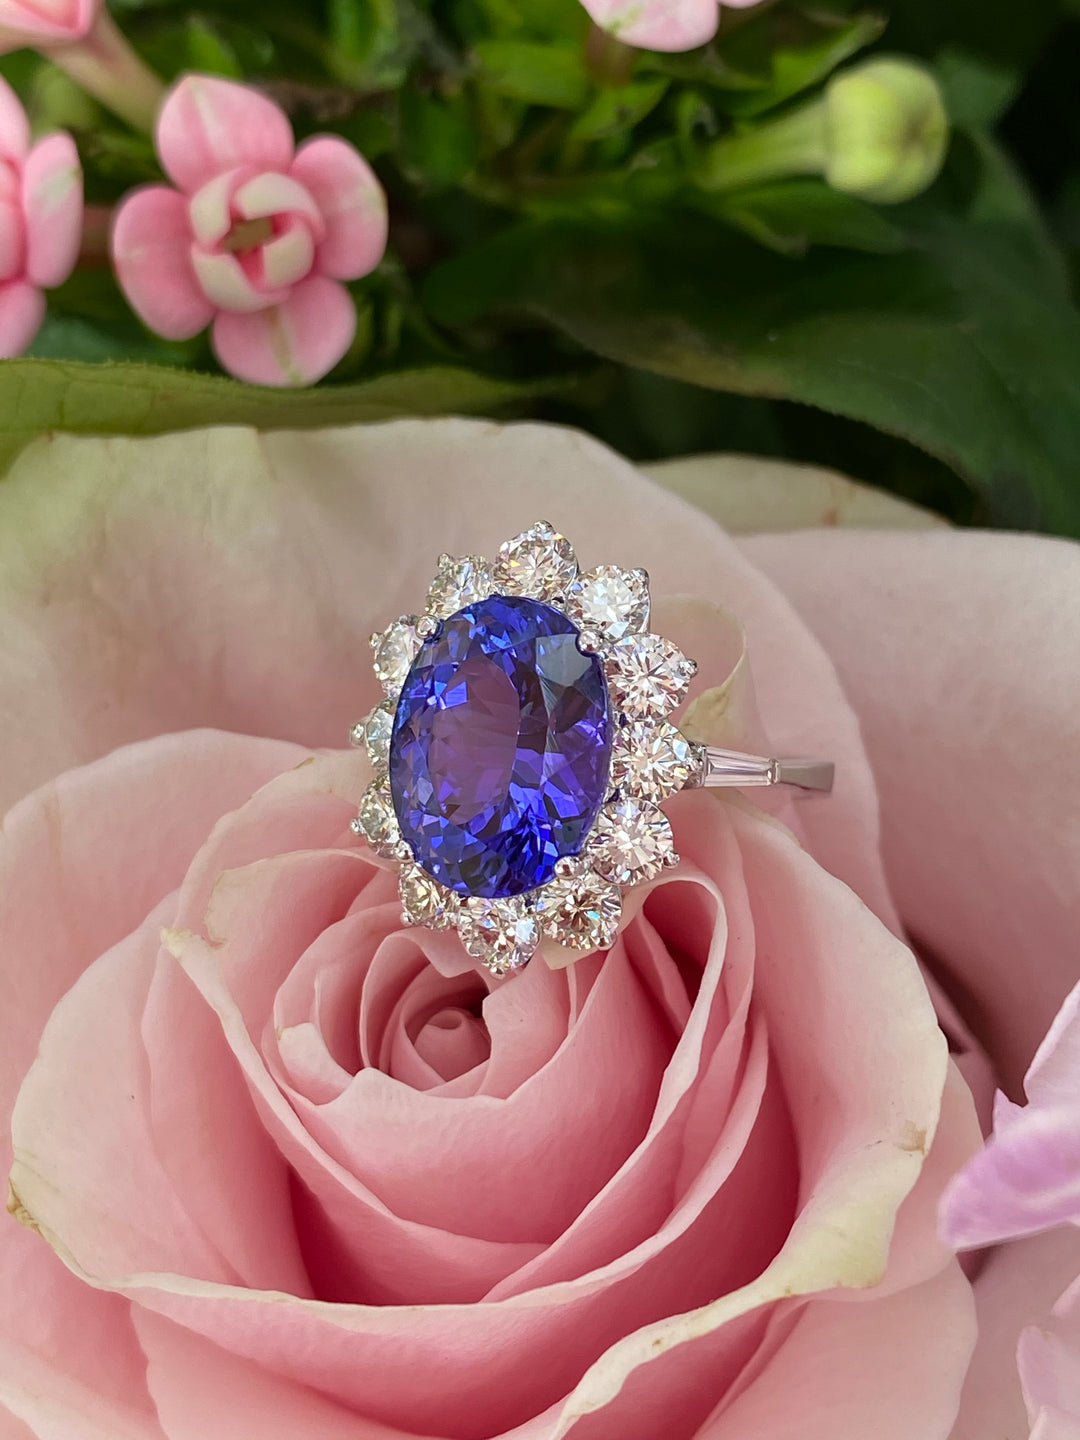 4.54 Carat Oval-Cut Tanzanite and Diamond Ring in 18ct White Gold